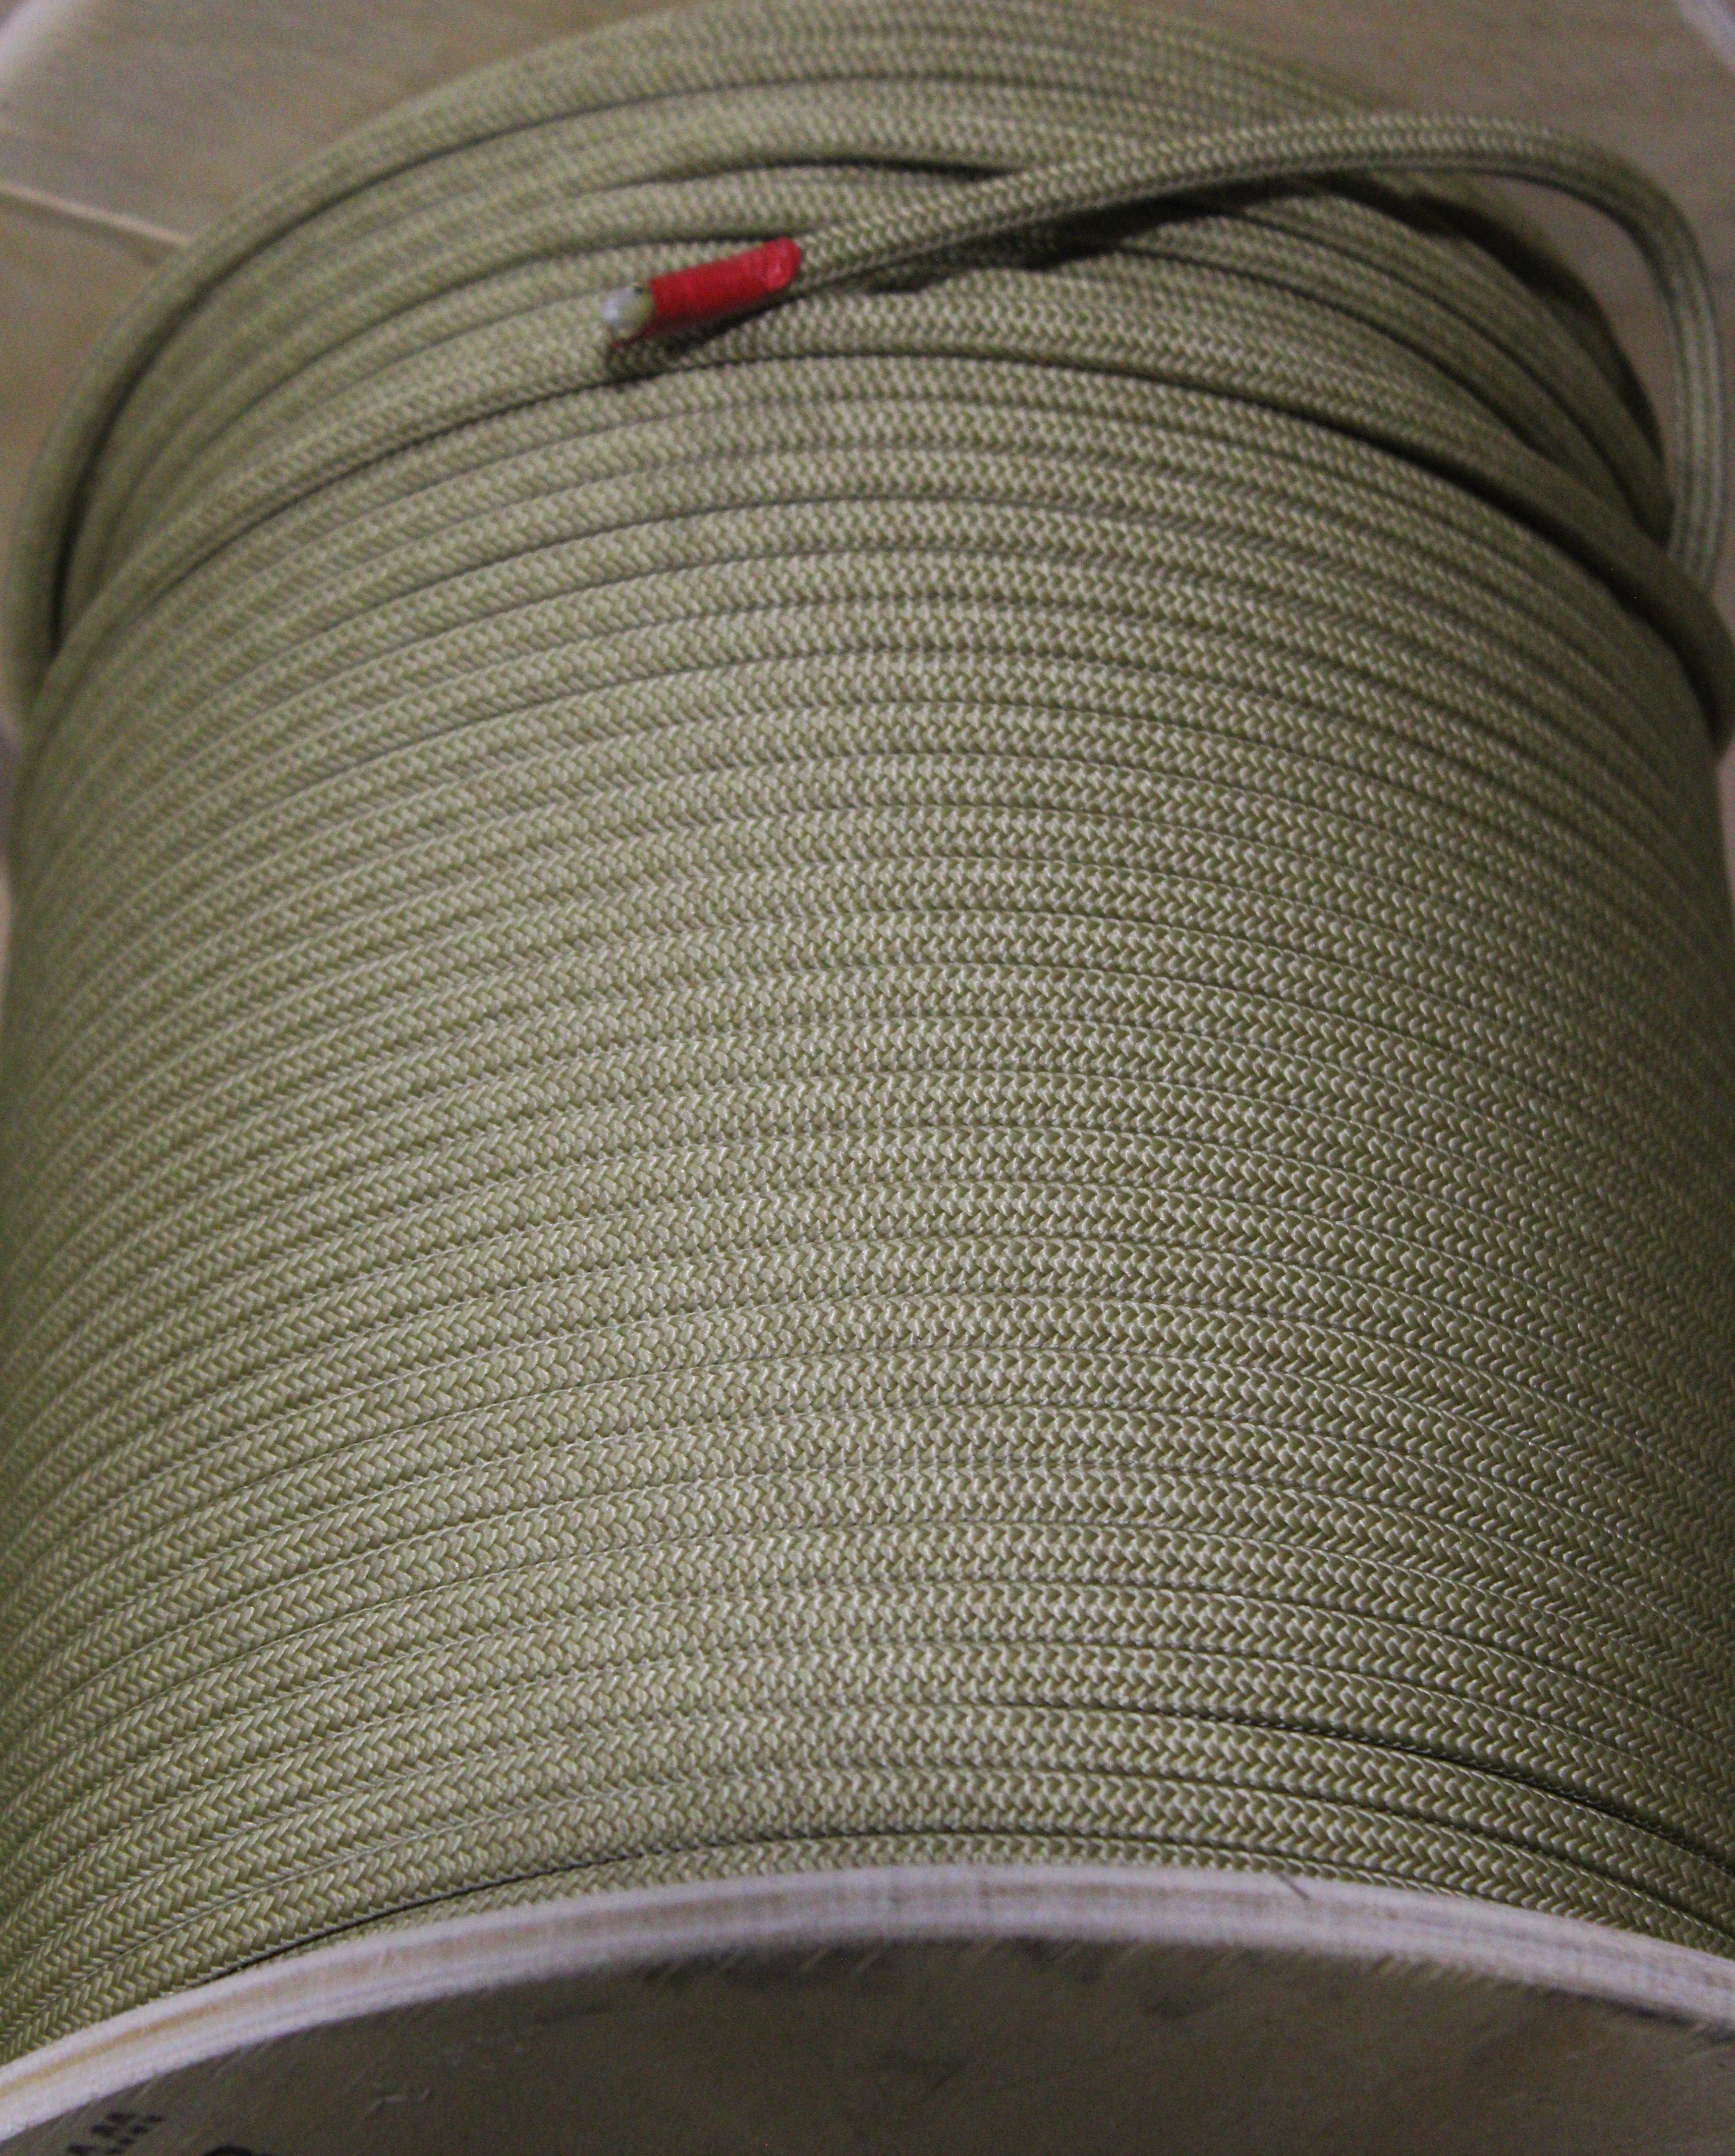 Static Line Details about   7mm x 140' Personal Escape Rope Kernmantle 100% Nylon Cord 